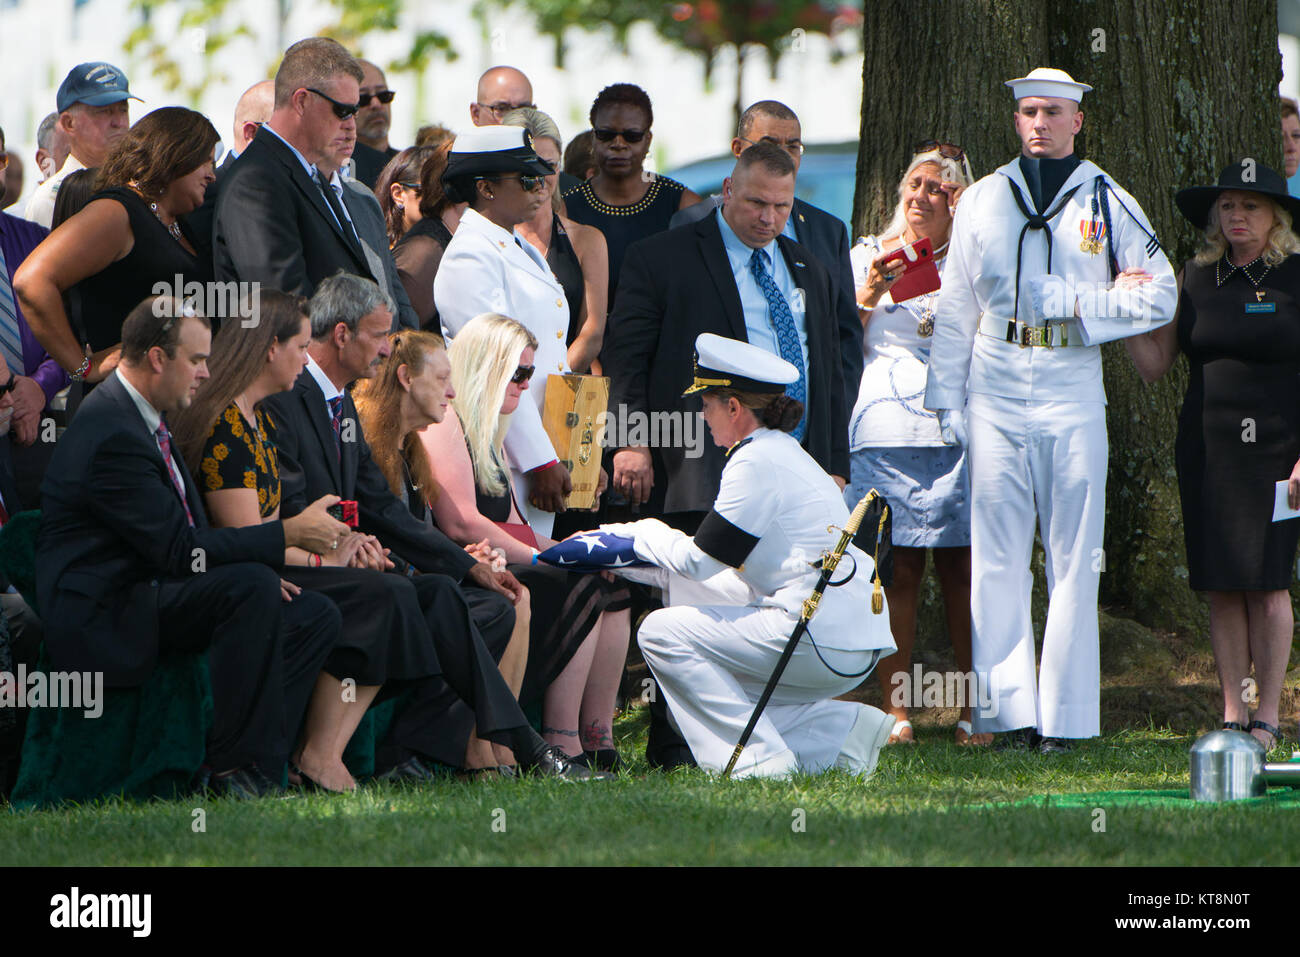 Erin Elizabeth Rehm receives the American flag from Vice Adm. Jan Tighe, Deputy Chief of Naval Operations for Information Warfare and Director of Naval Intelligence, during the graveside service for her husband, U.S. Navy Fire Controlman Chief Gary Leo Rehm Jr. at Arlington National Cemetery, Arlington, Va., Aug. 16, 2017. Rehm perished when the USS Fitzgerald (DDG 62) was involved in a collision with the Philippine-flagged merchant vessel ACX Crystal on June 17, 2017. The U.S. Navy posthumously promoted Rehm to Fire Controlman Chief in a ceremony earlier this week. (U.S. Army photo by Elizabe Stock Photo